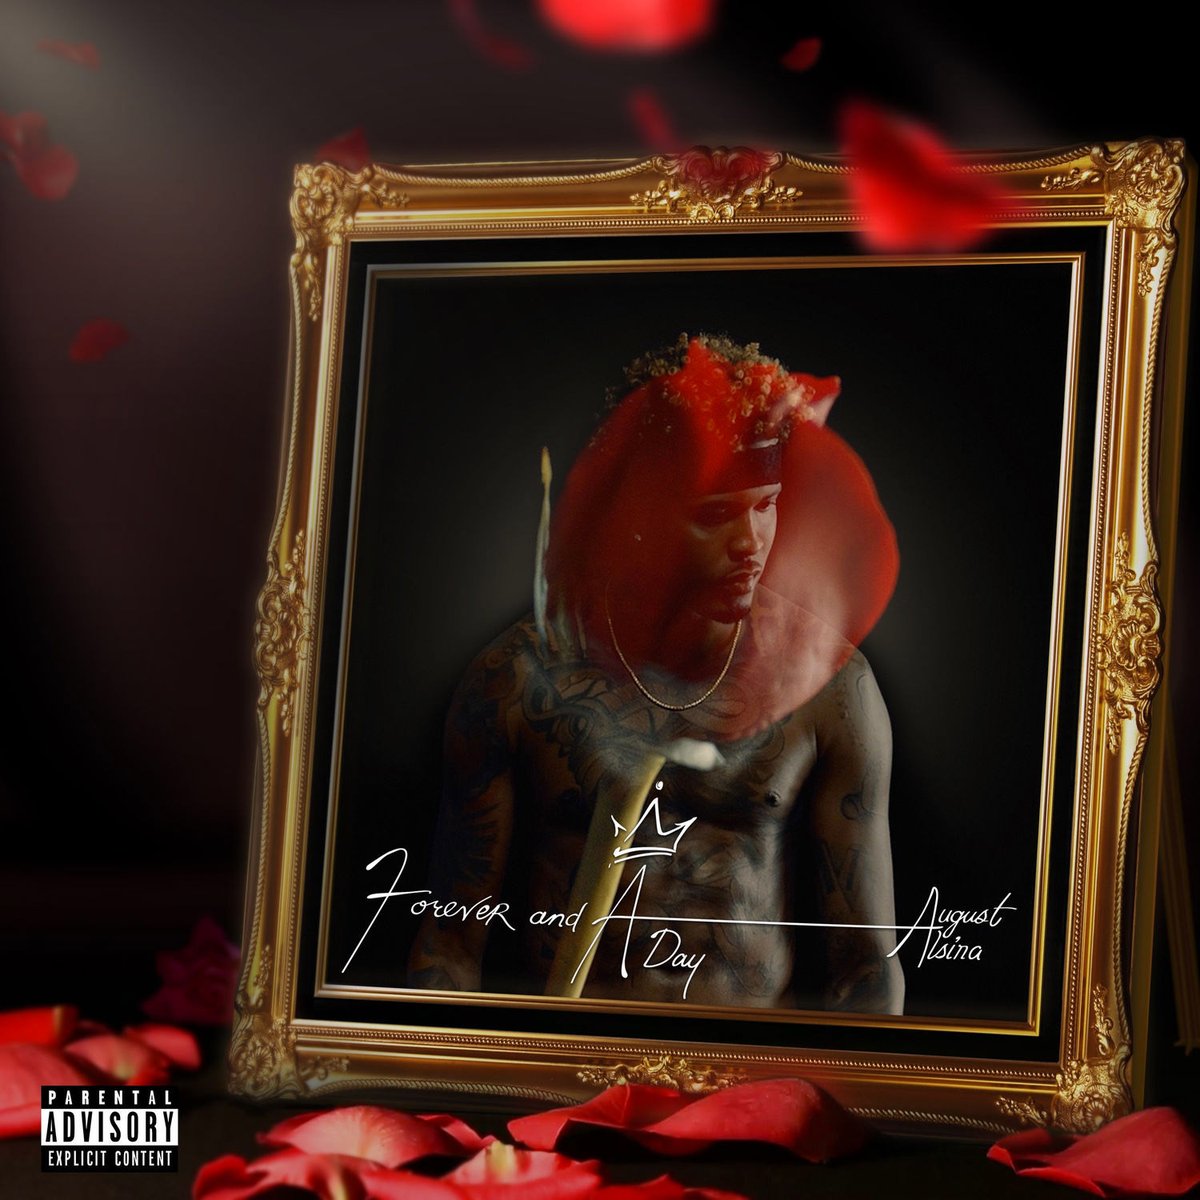 [STREAM] The August Alsina Forever and a Day EP Is Ready for Listen